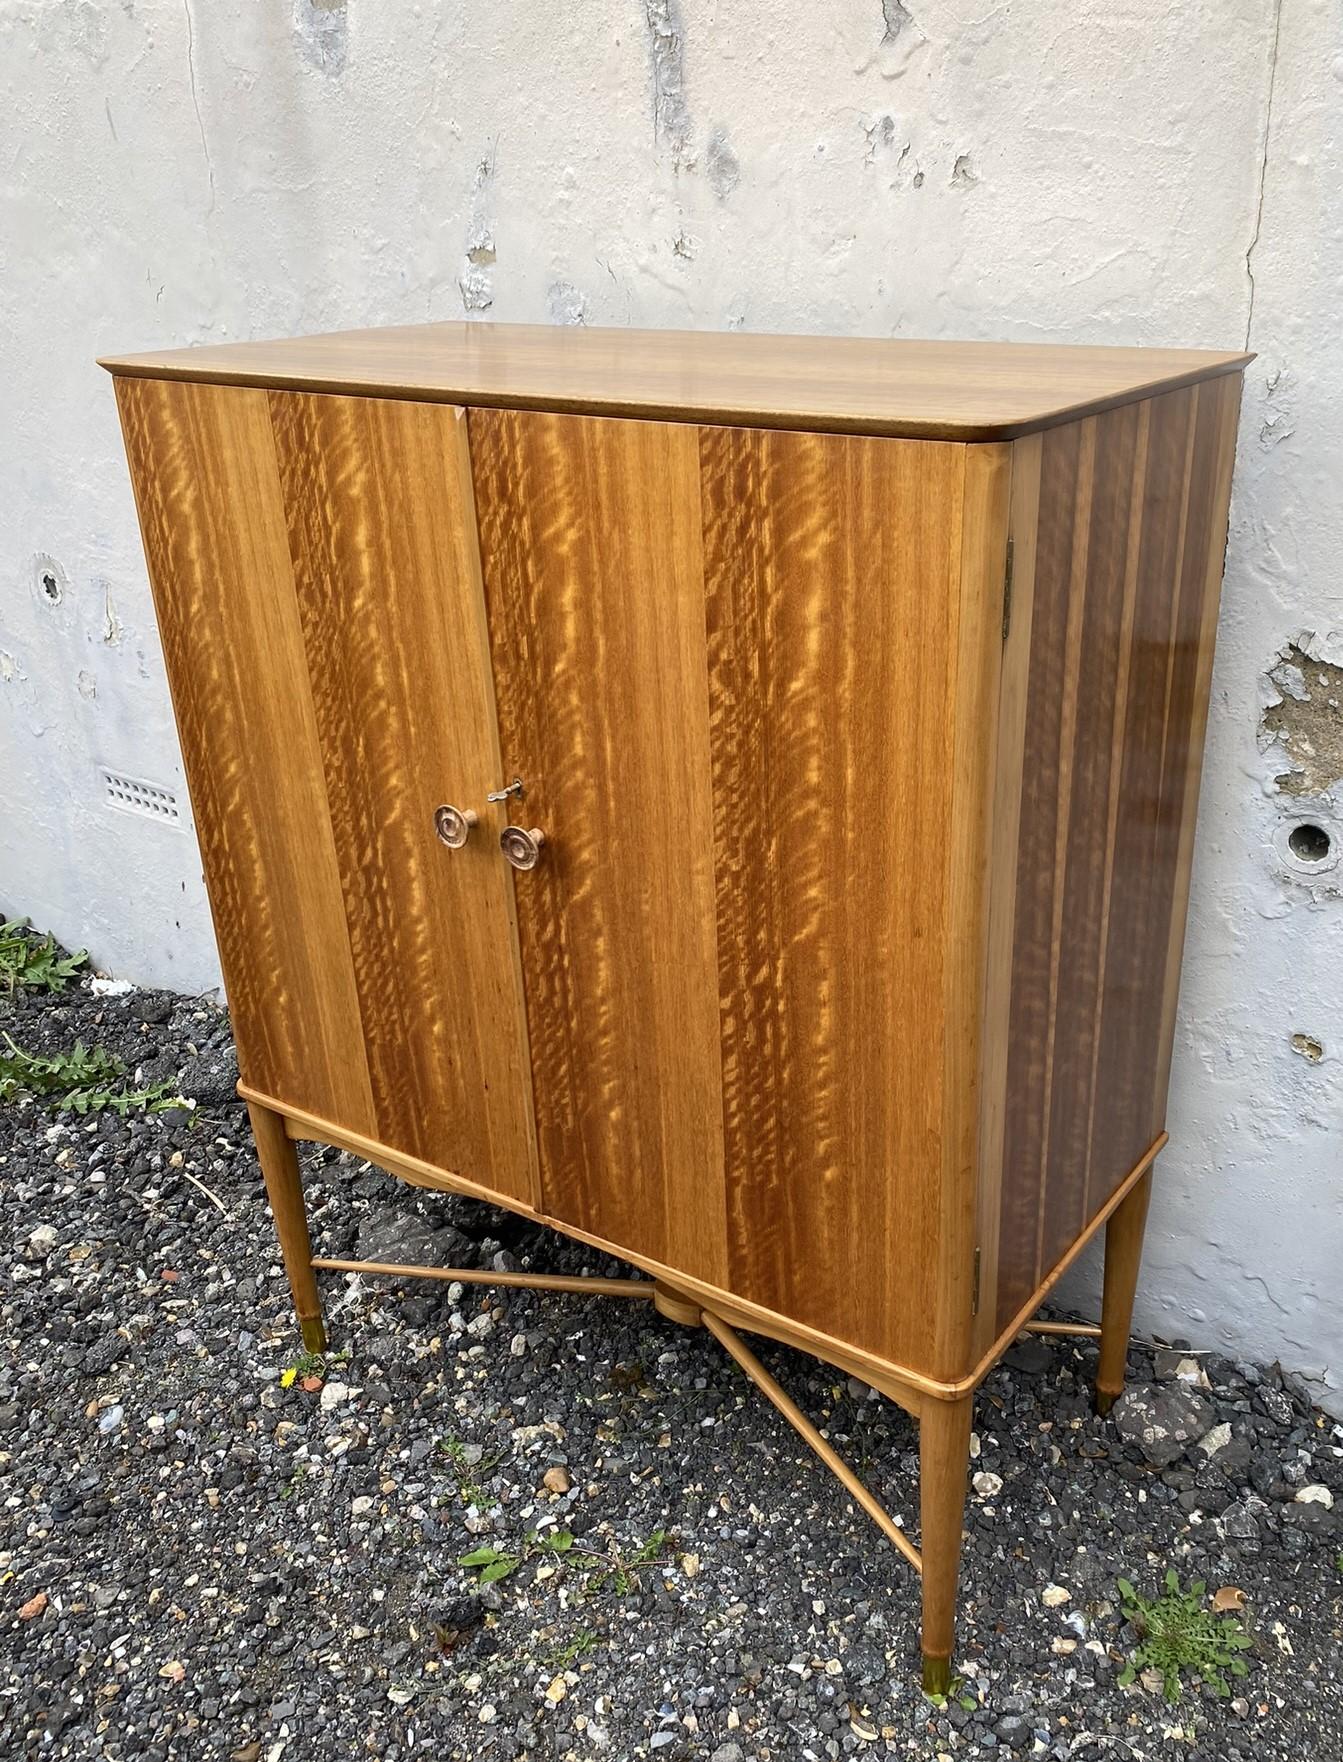 Mid-Century Satinwood Tallboy Cabinet for Heals, Utility Furniture, English, 1950s

Rare and beautiful mid-century tallboy made of satinwood and beech, with two turned knobs and an elegant stretcher, Turned legs with brass caps. This tallboy opens